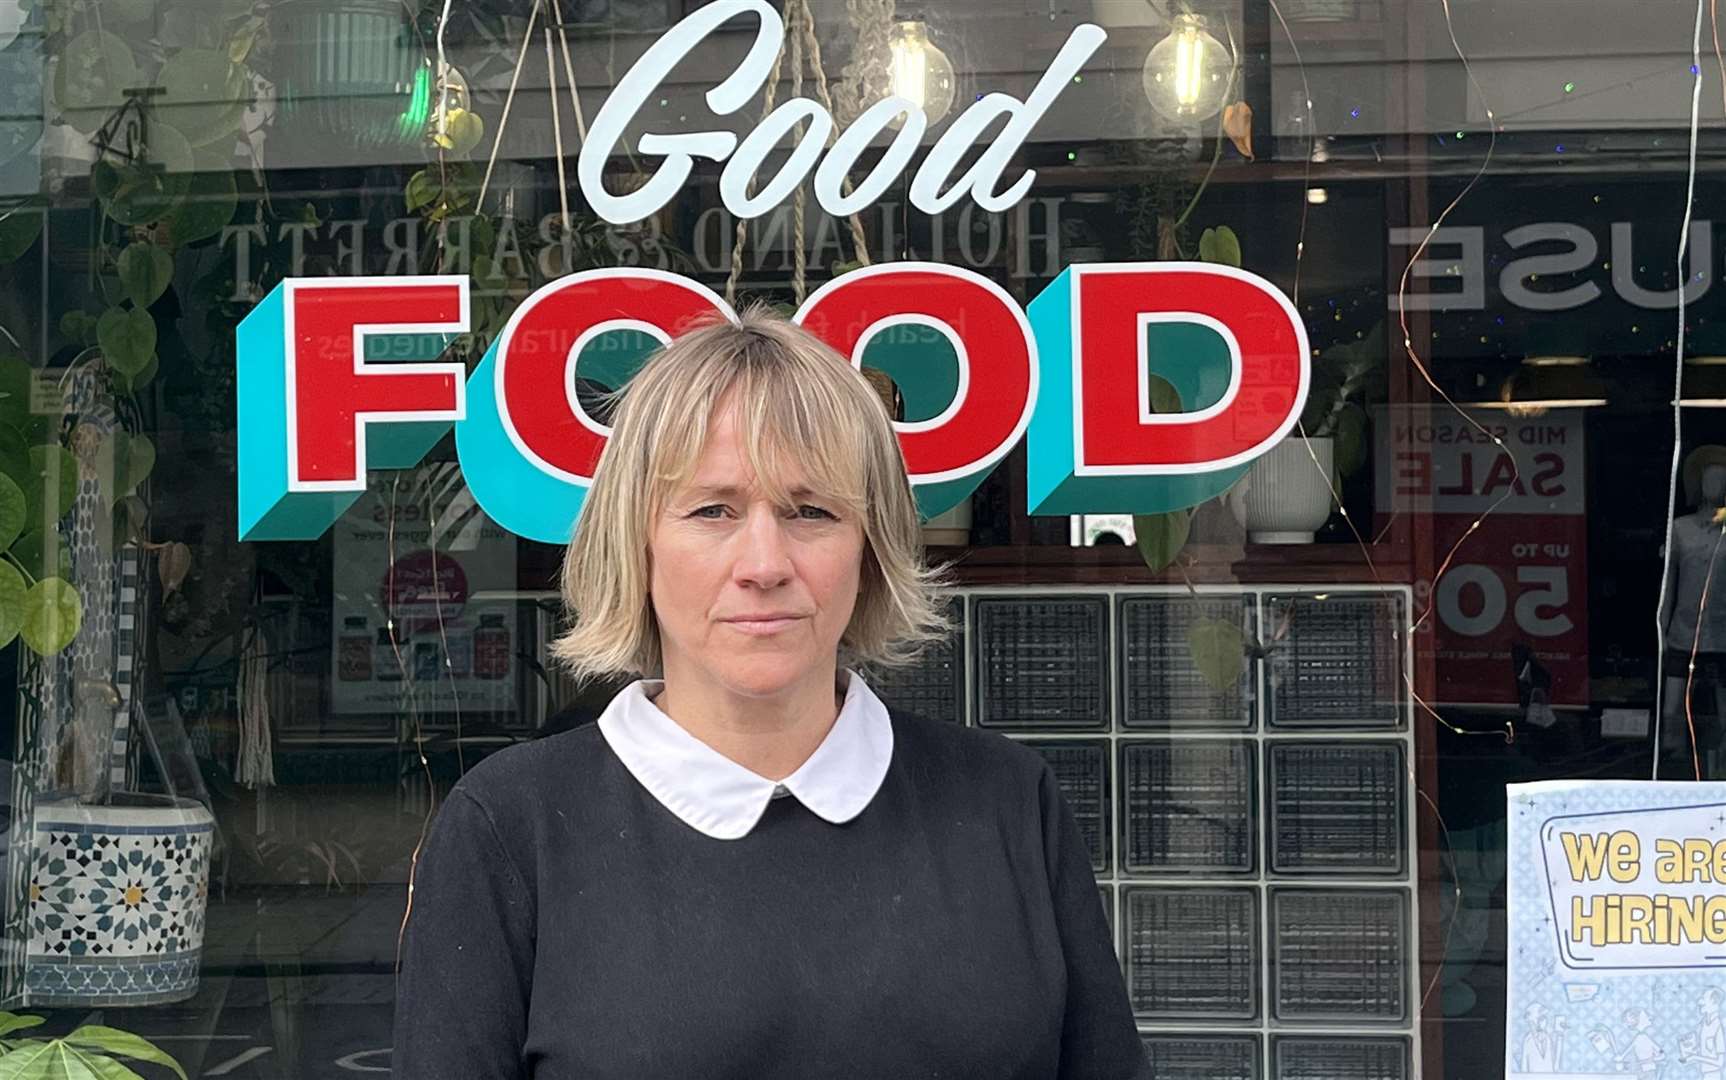 Revival executive director Deborah Haylett is concerned for the wellbeing of community members who make use of Revival Food and Mood's mental health groups